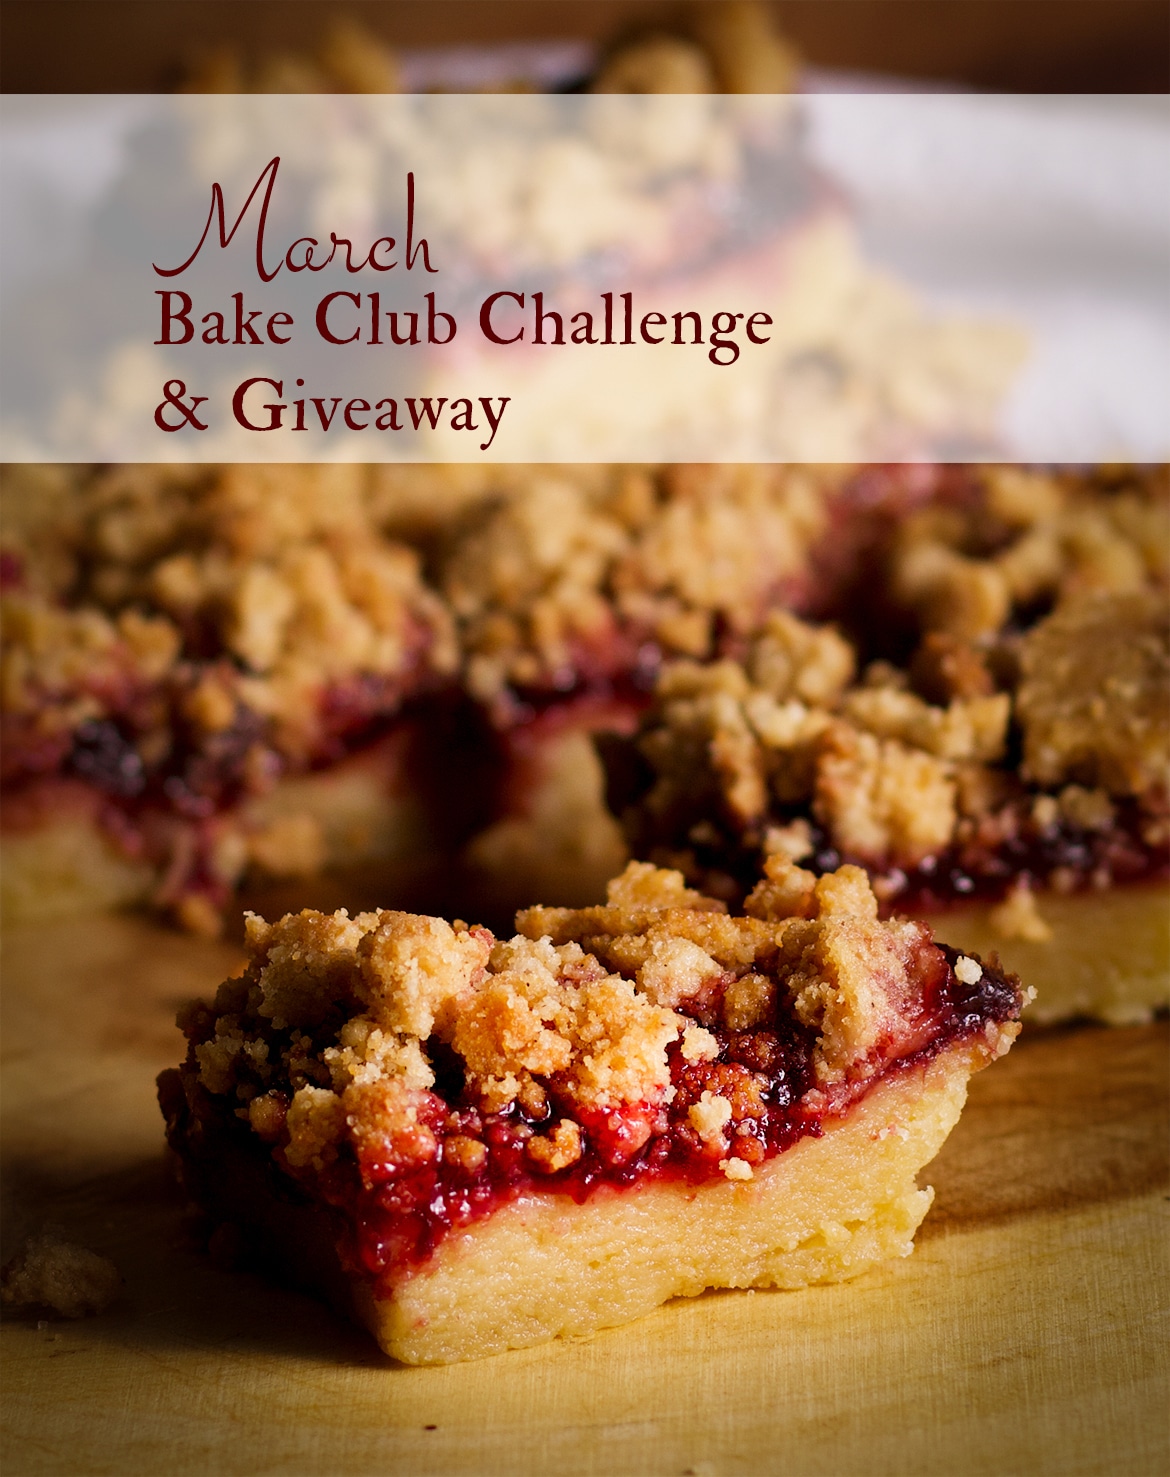 The March 2021 Of Batter and Dough Bake Club Challenge Recipe is Cherry Shortbread Crumble Bars